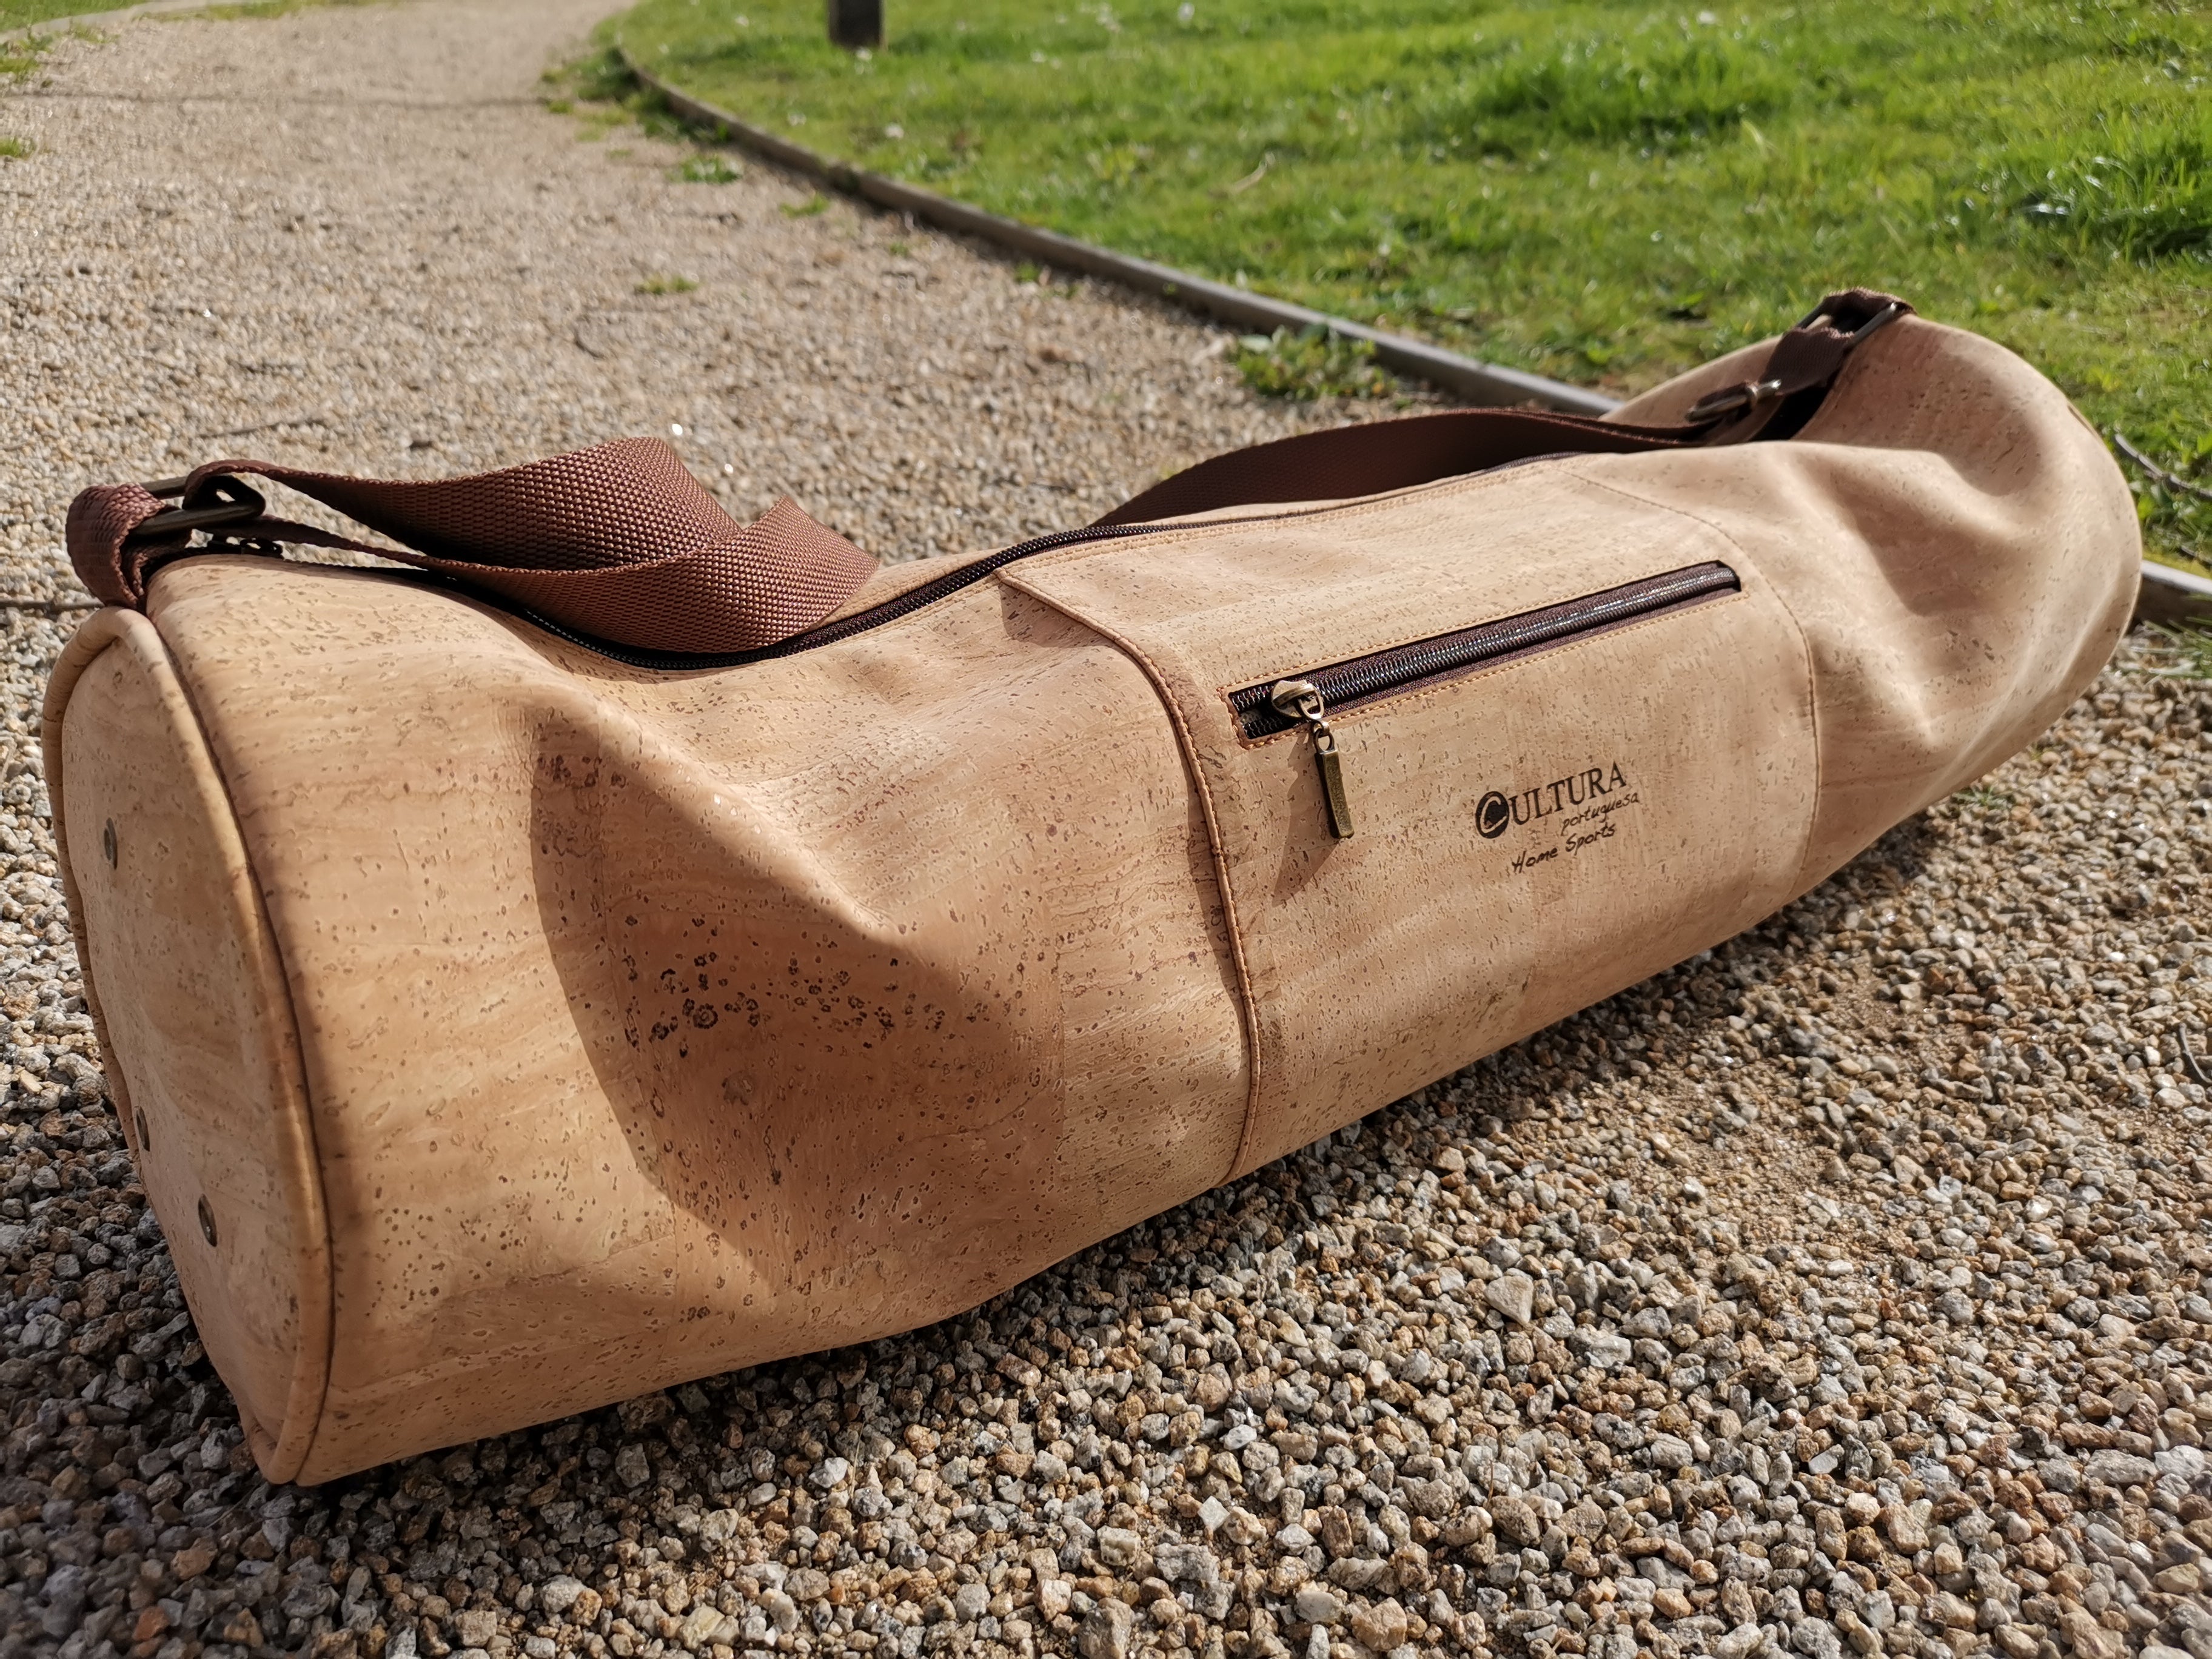 Cork Bag for Yoga Mats | Made in Portugal